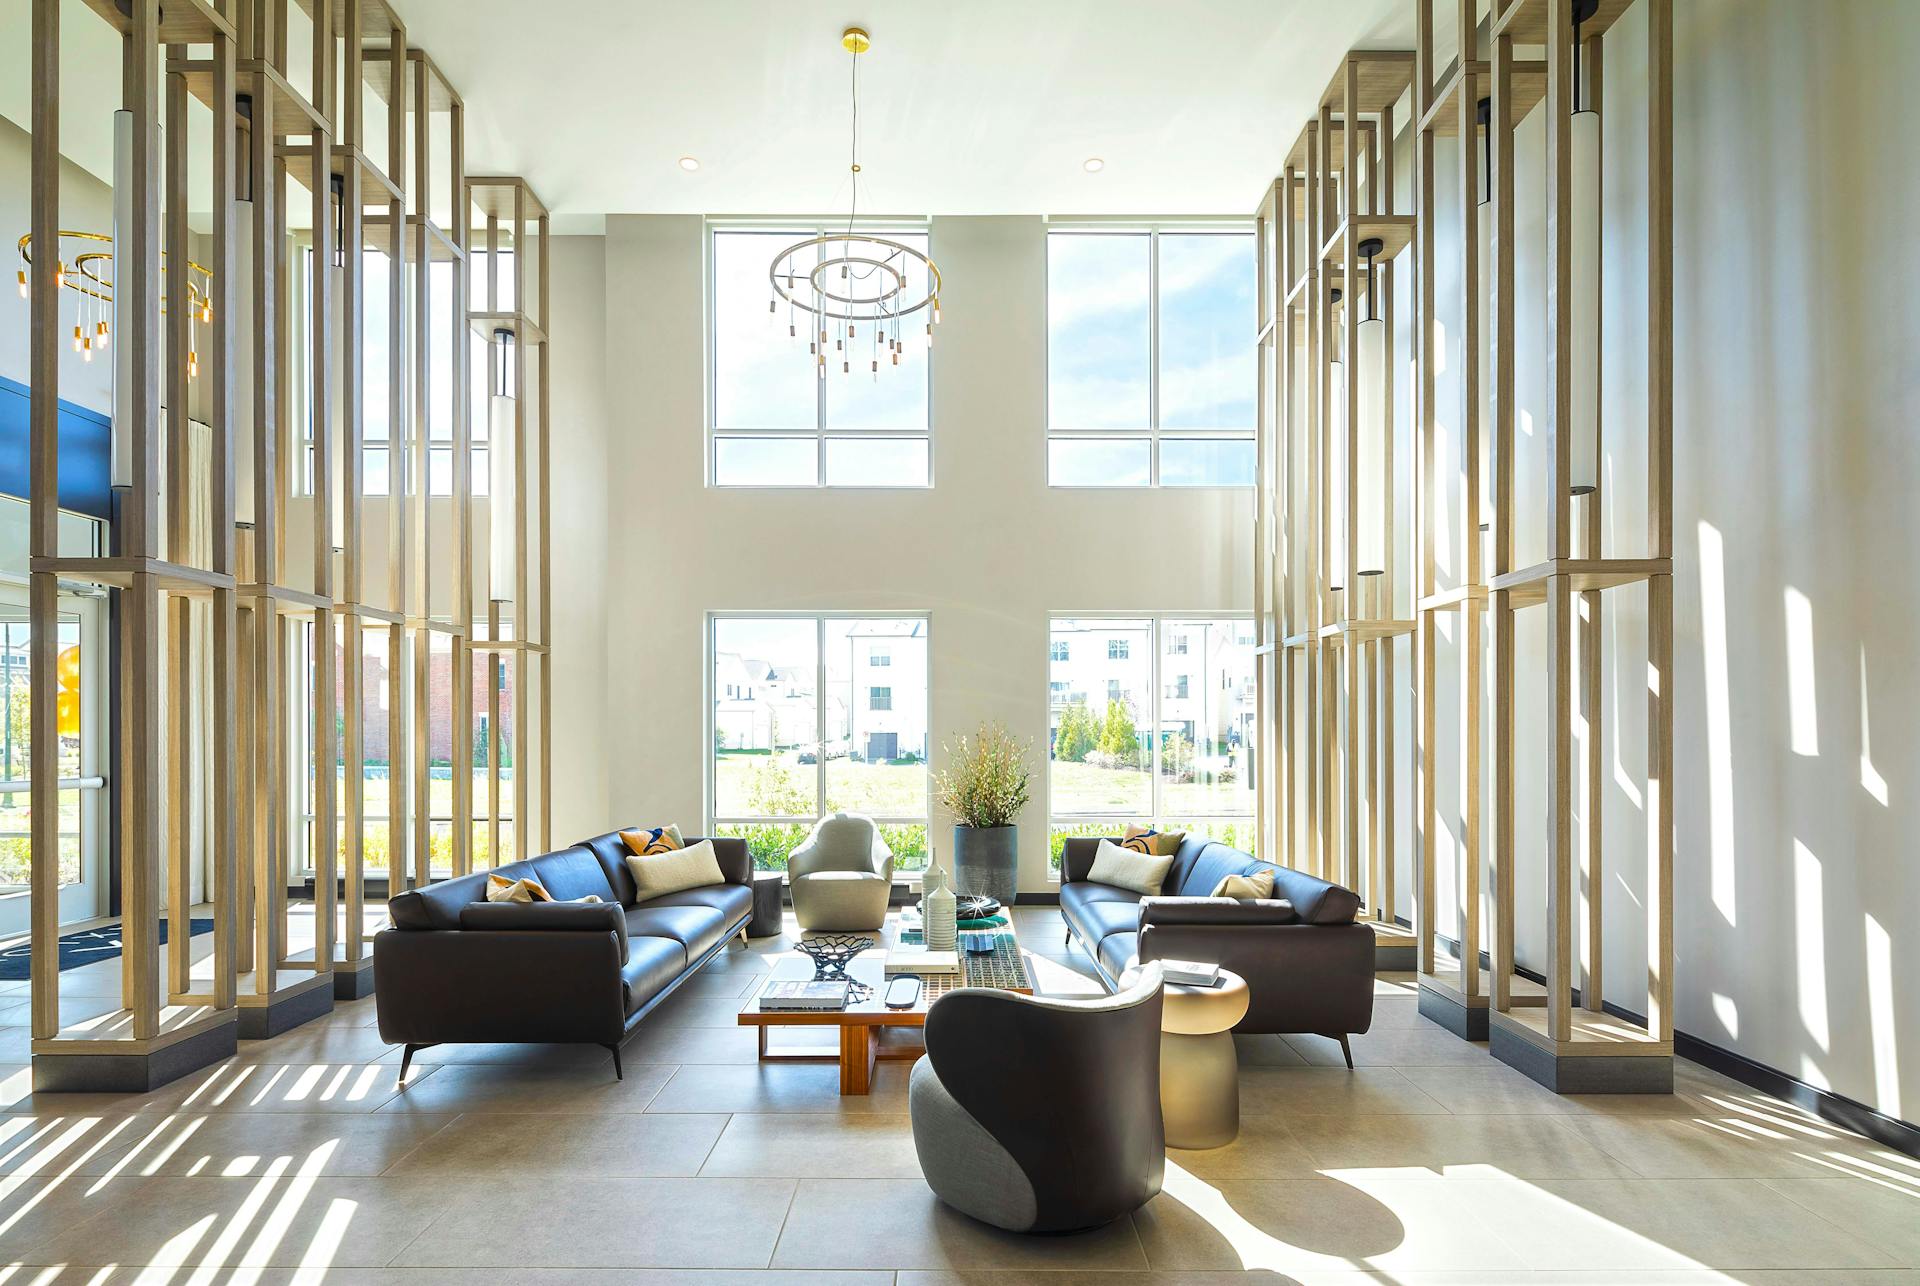 Lobby lounge with large windows and natural light